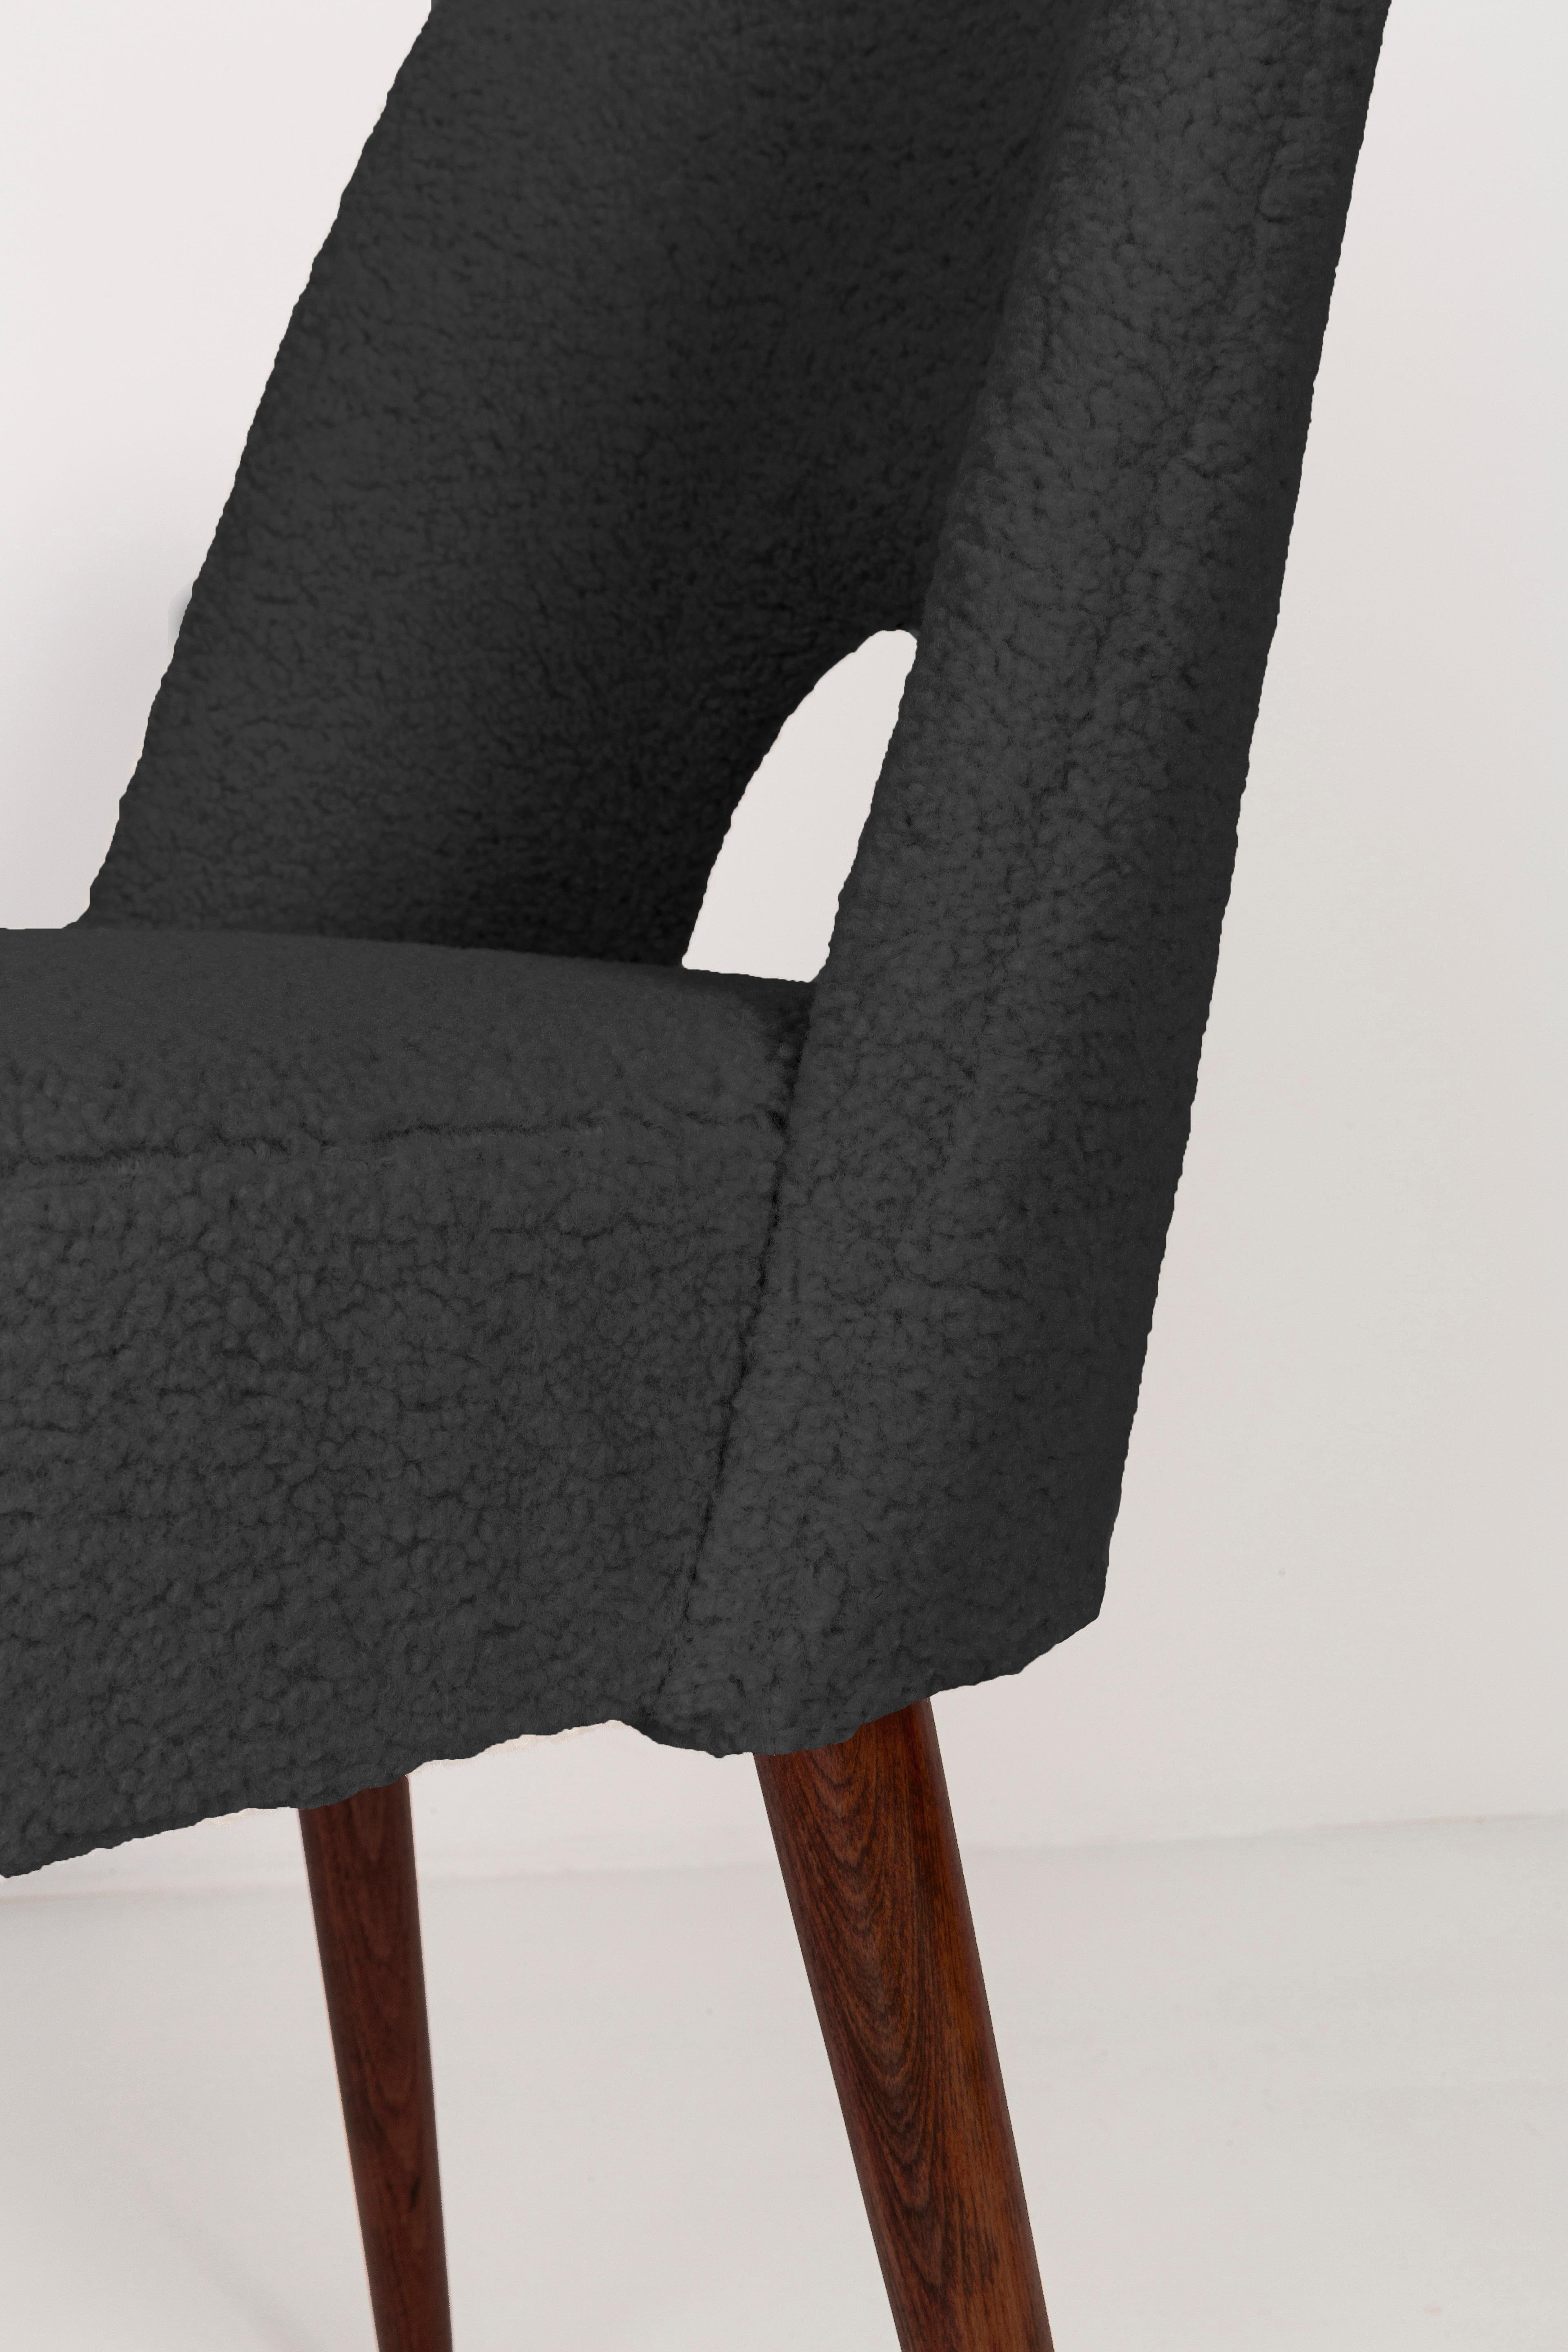 Woodwork Dark Gray Boucle 'Shell' Chair, 1960s For Sale